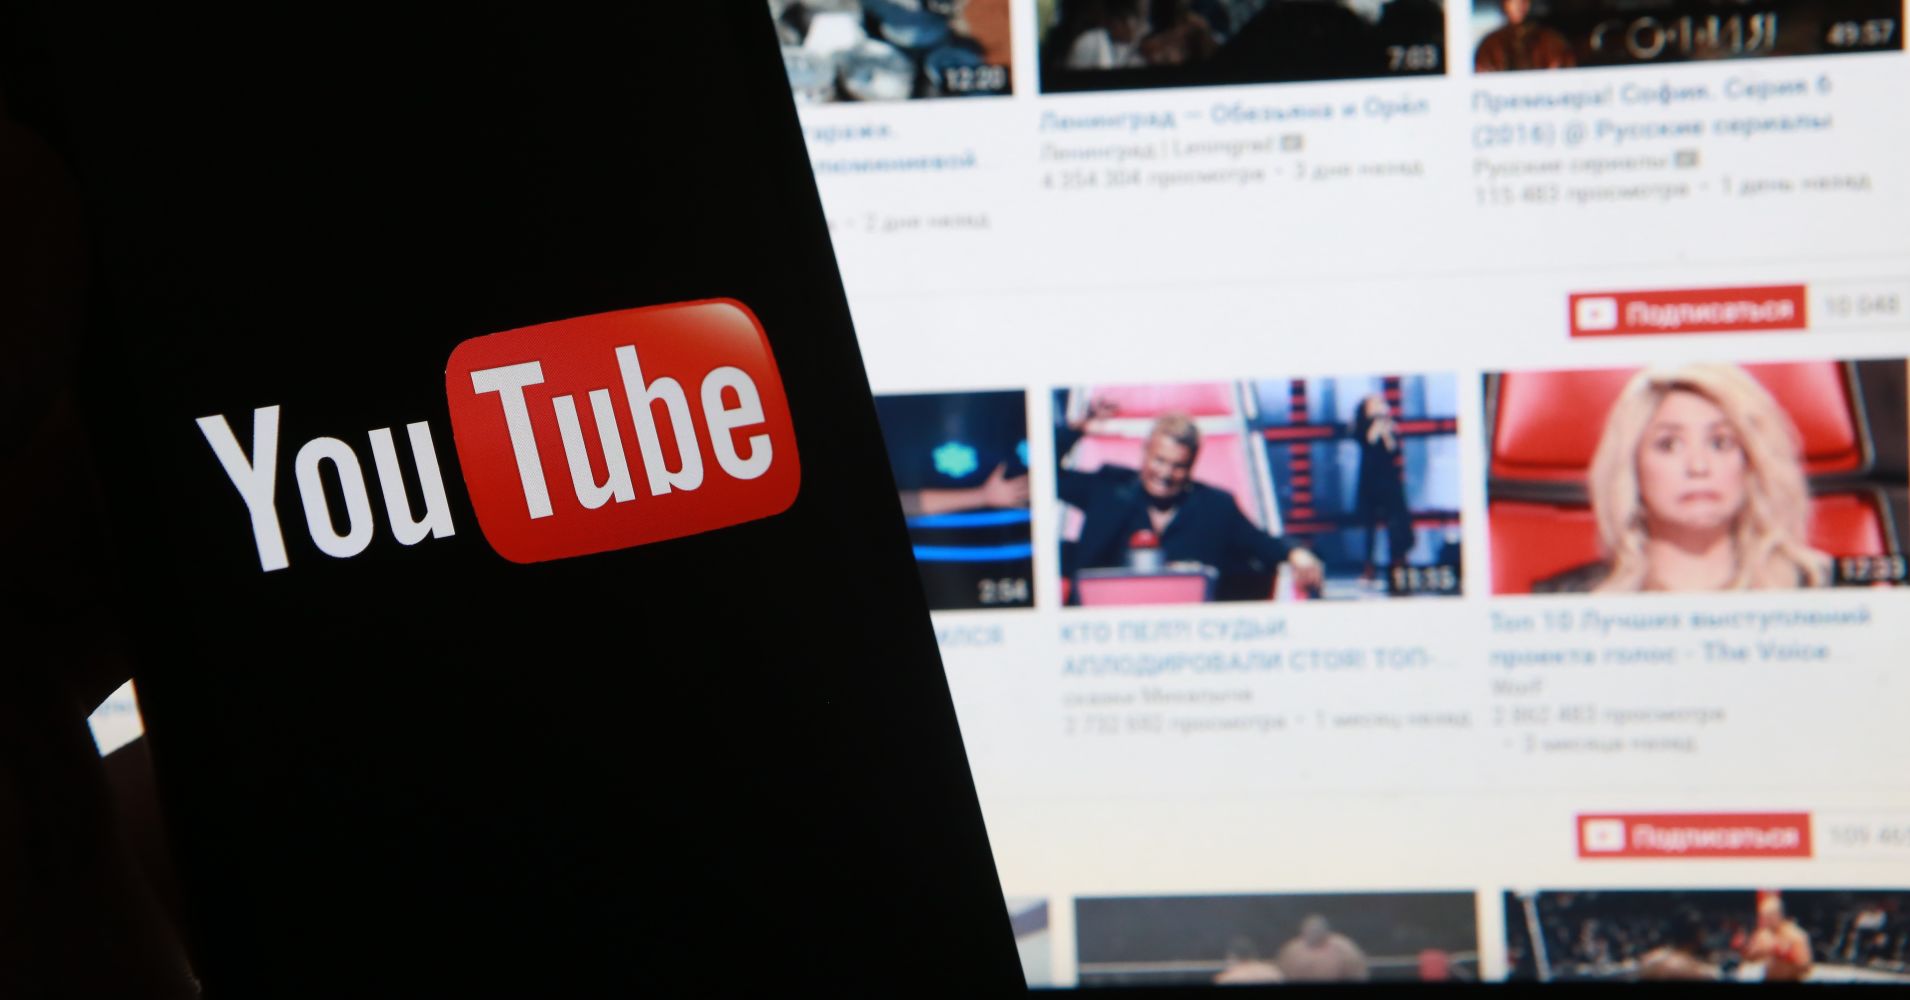 A new feature on YouTube has emerged that shows how much time you spend watching videos